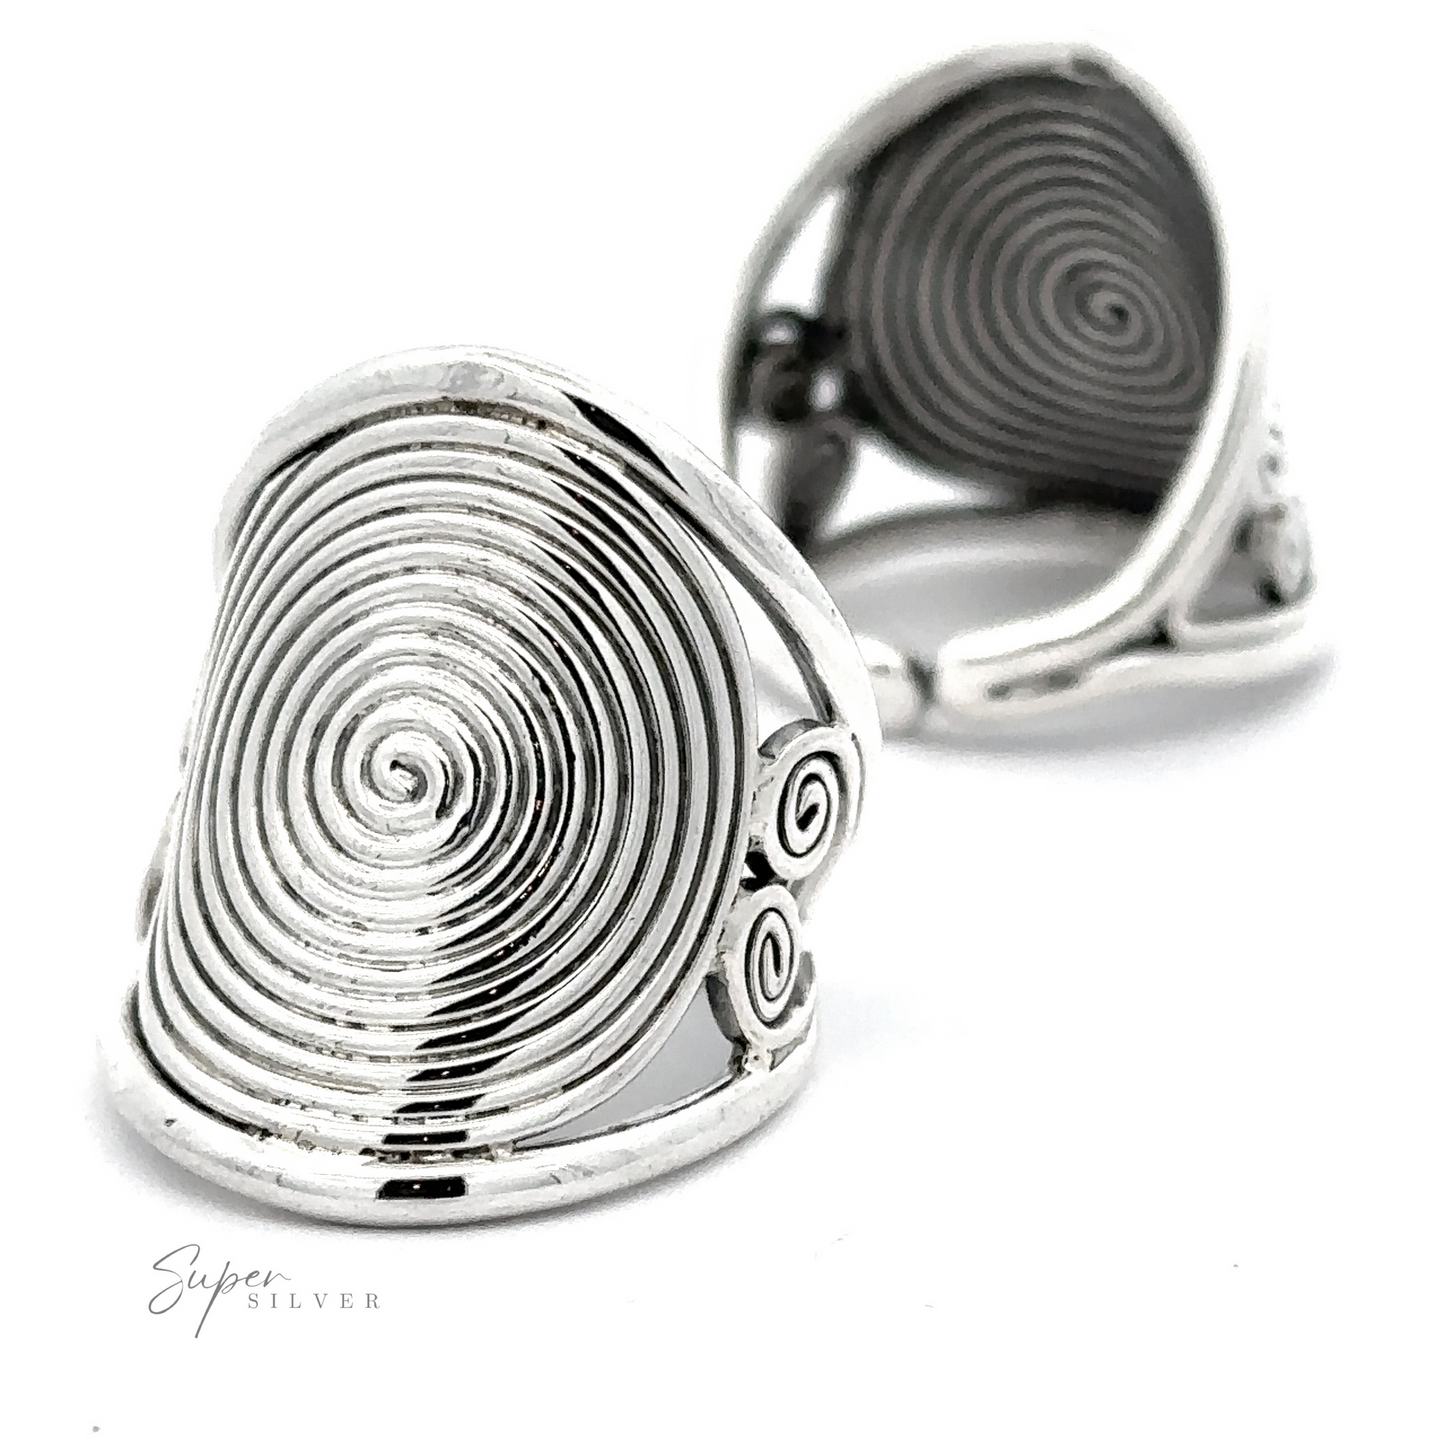 Two intricately designed silver Adjustable Spiral Rings with fine line textures and small swirl accents on a white background.